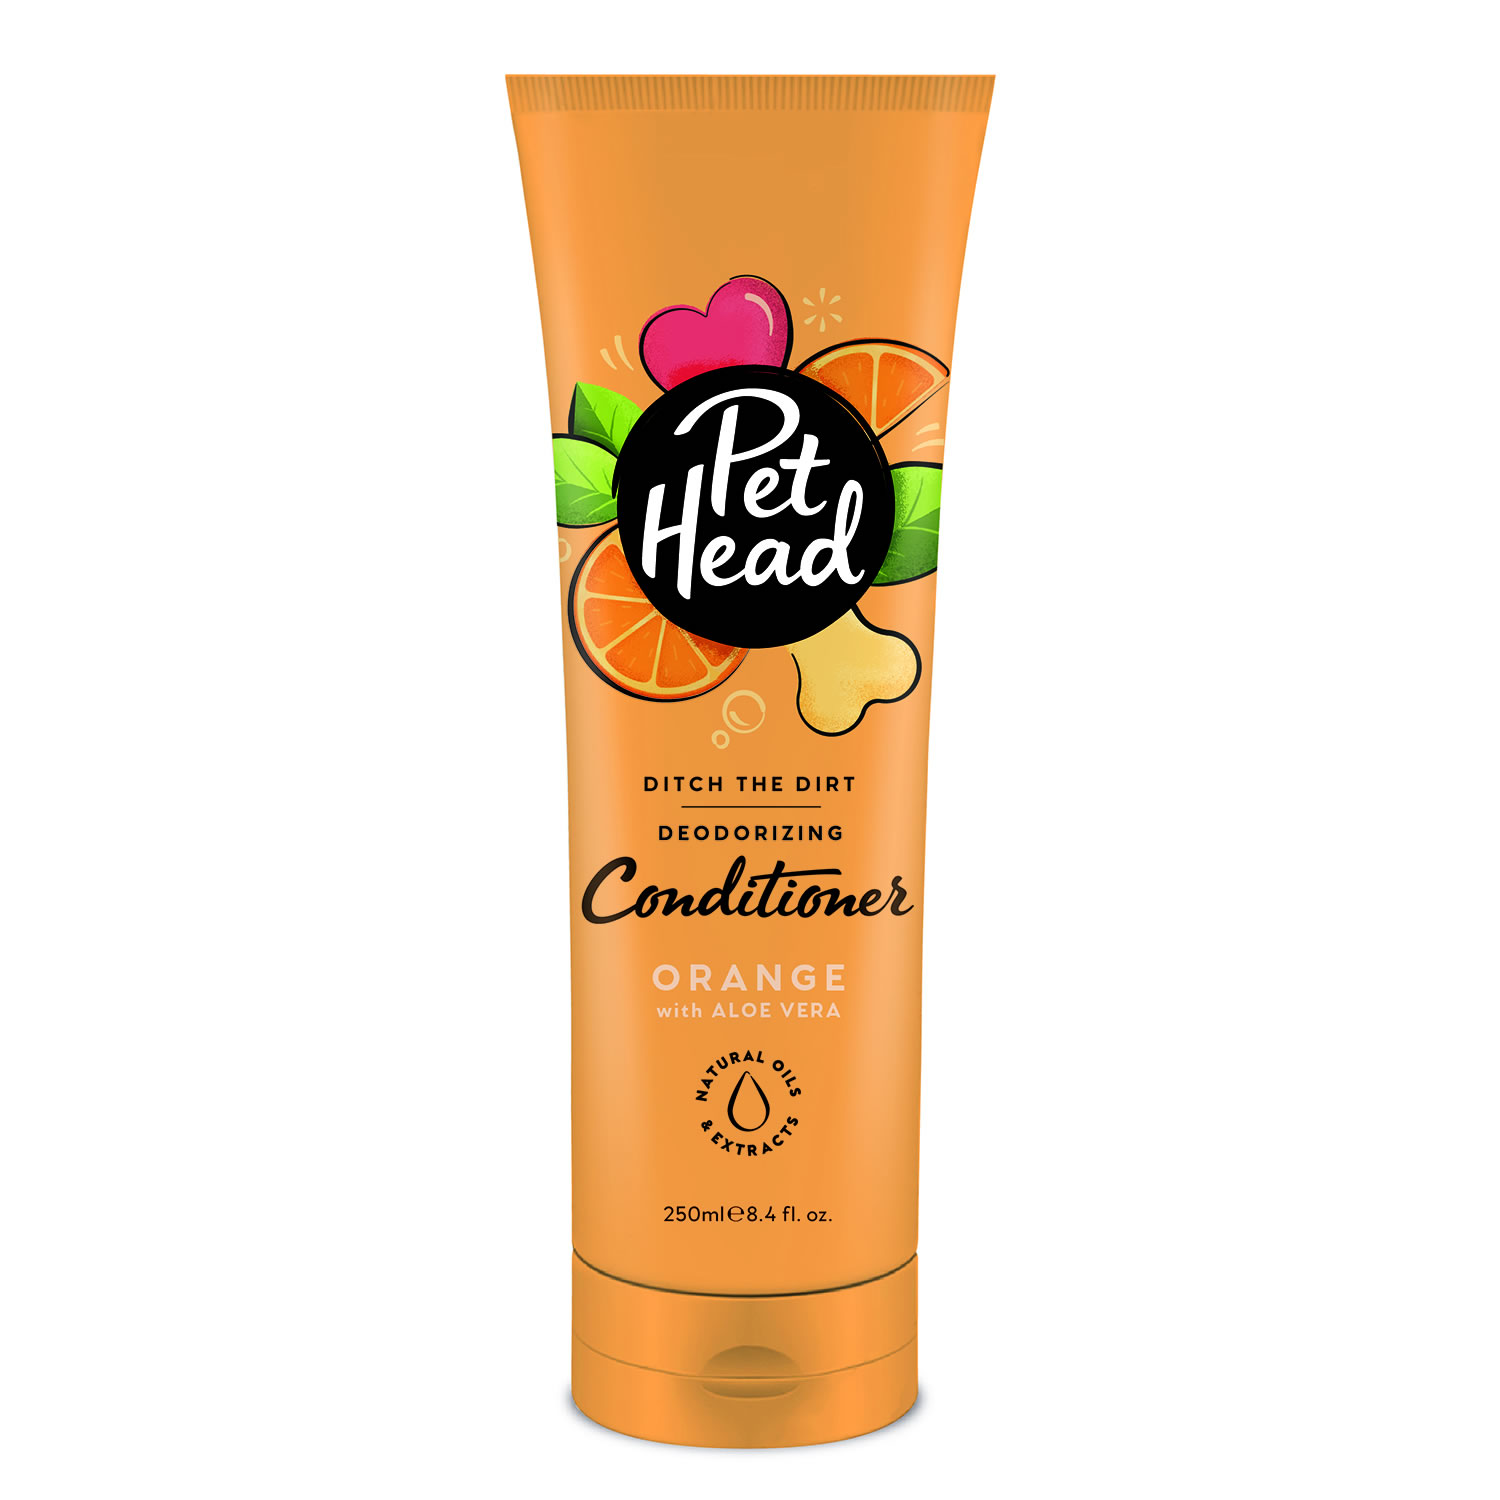 PET HEAD DITCH THE DIRT CONDITIONER  250 ML